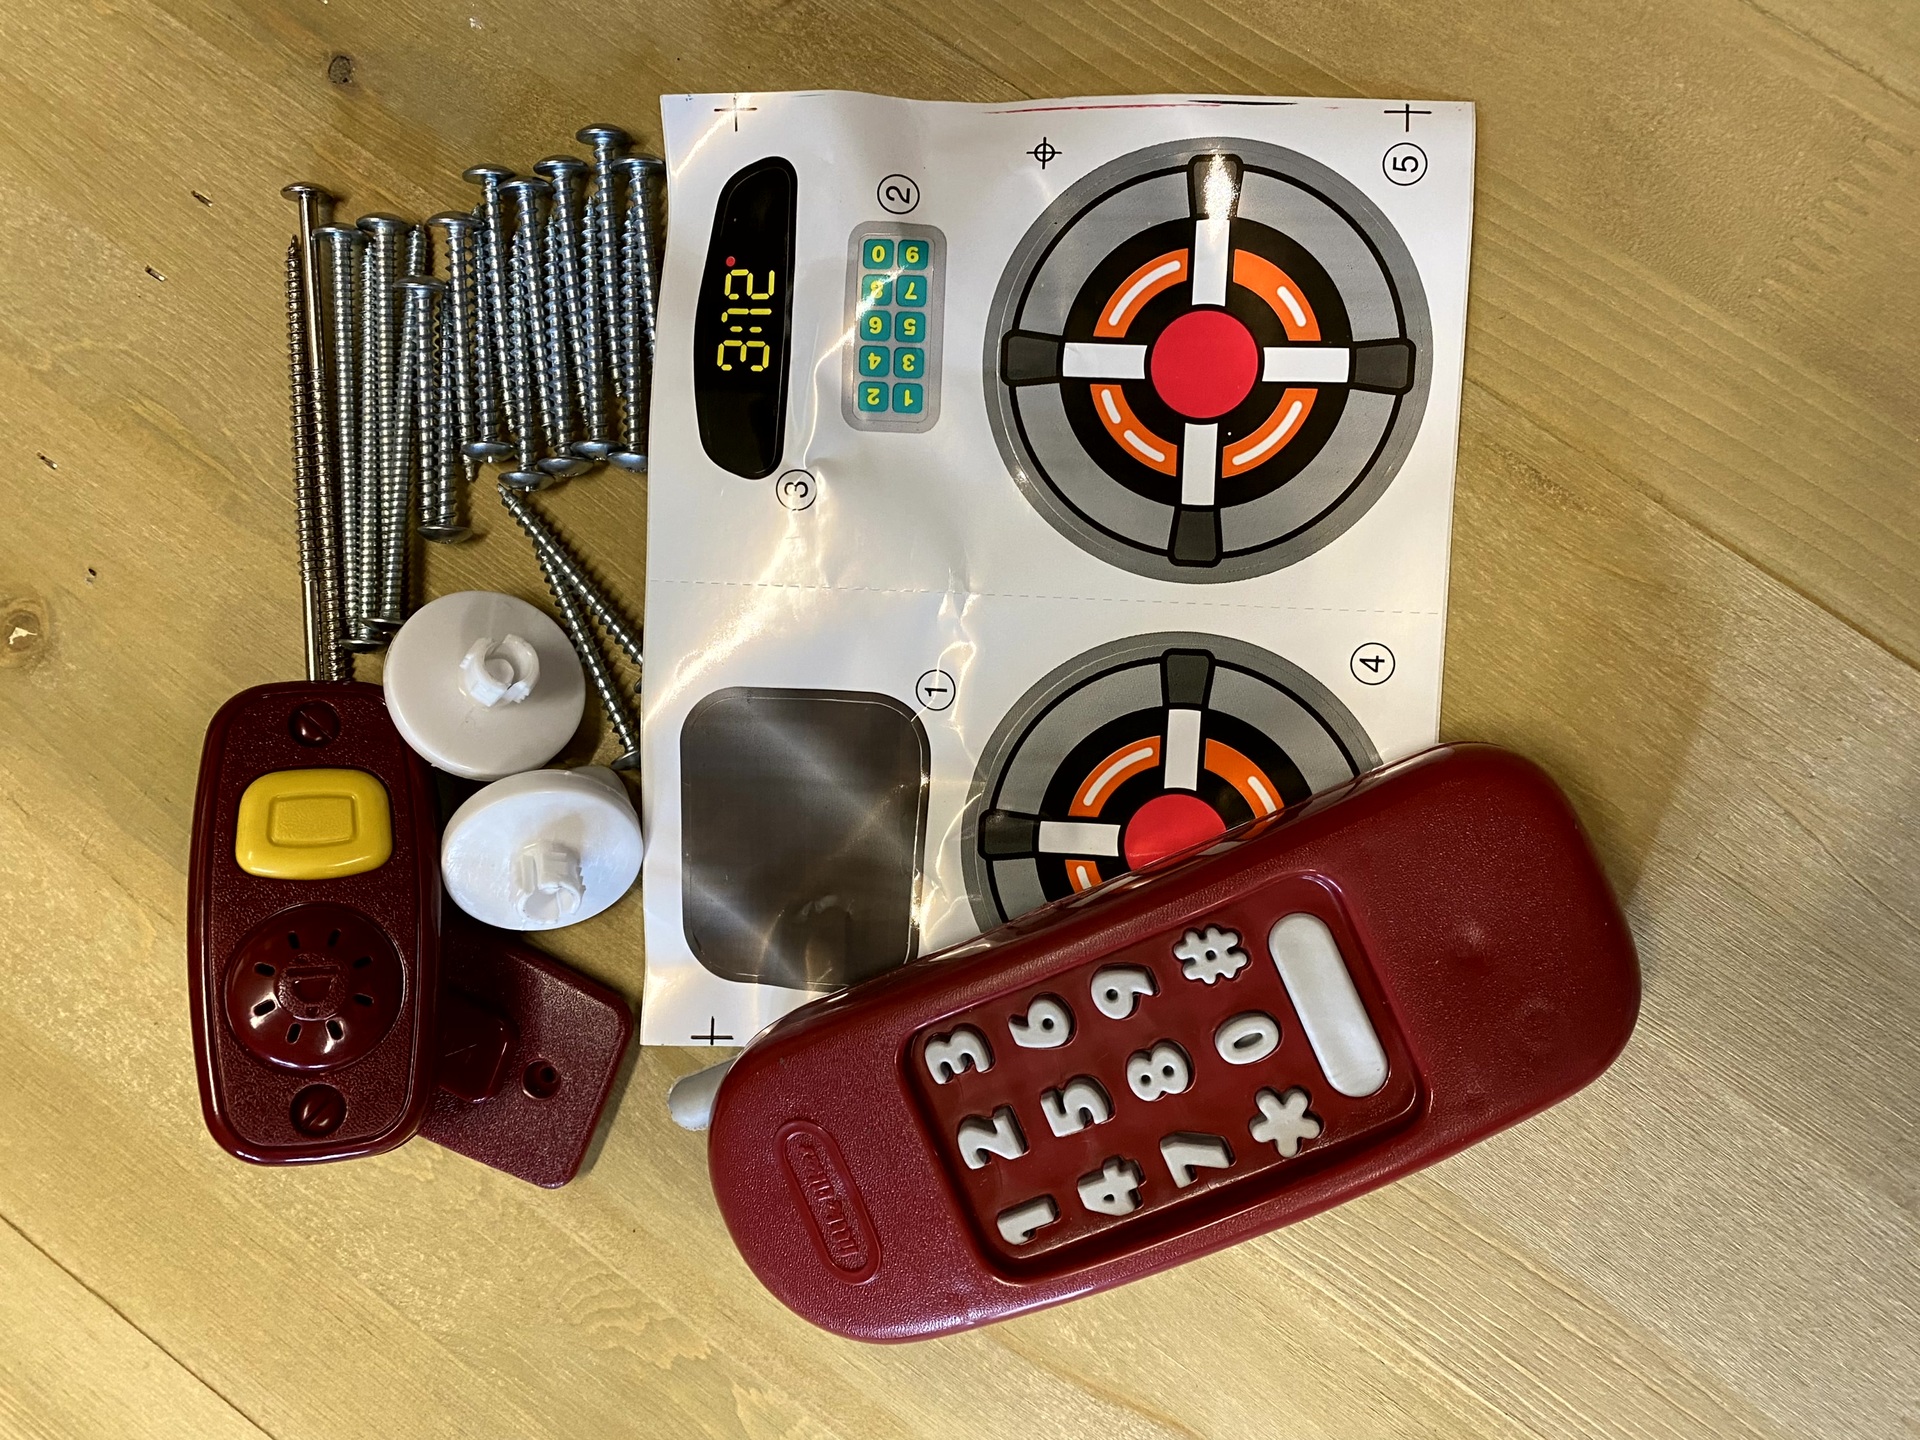 Hardware Pack includes Screws, Phone,Doorbell, Hob Stickers and Cooker Knobs Image